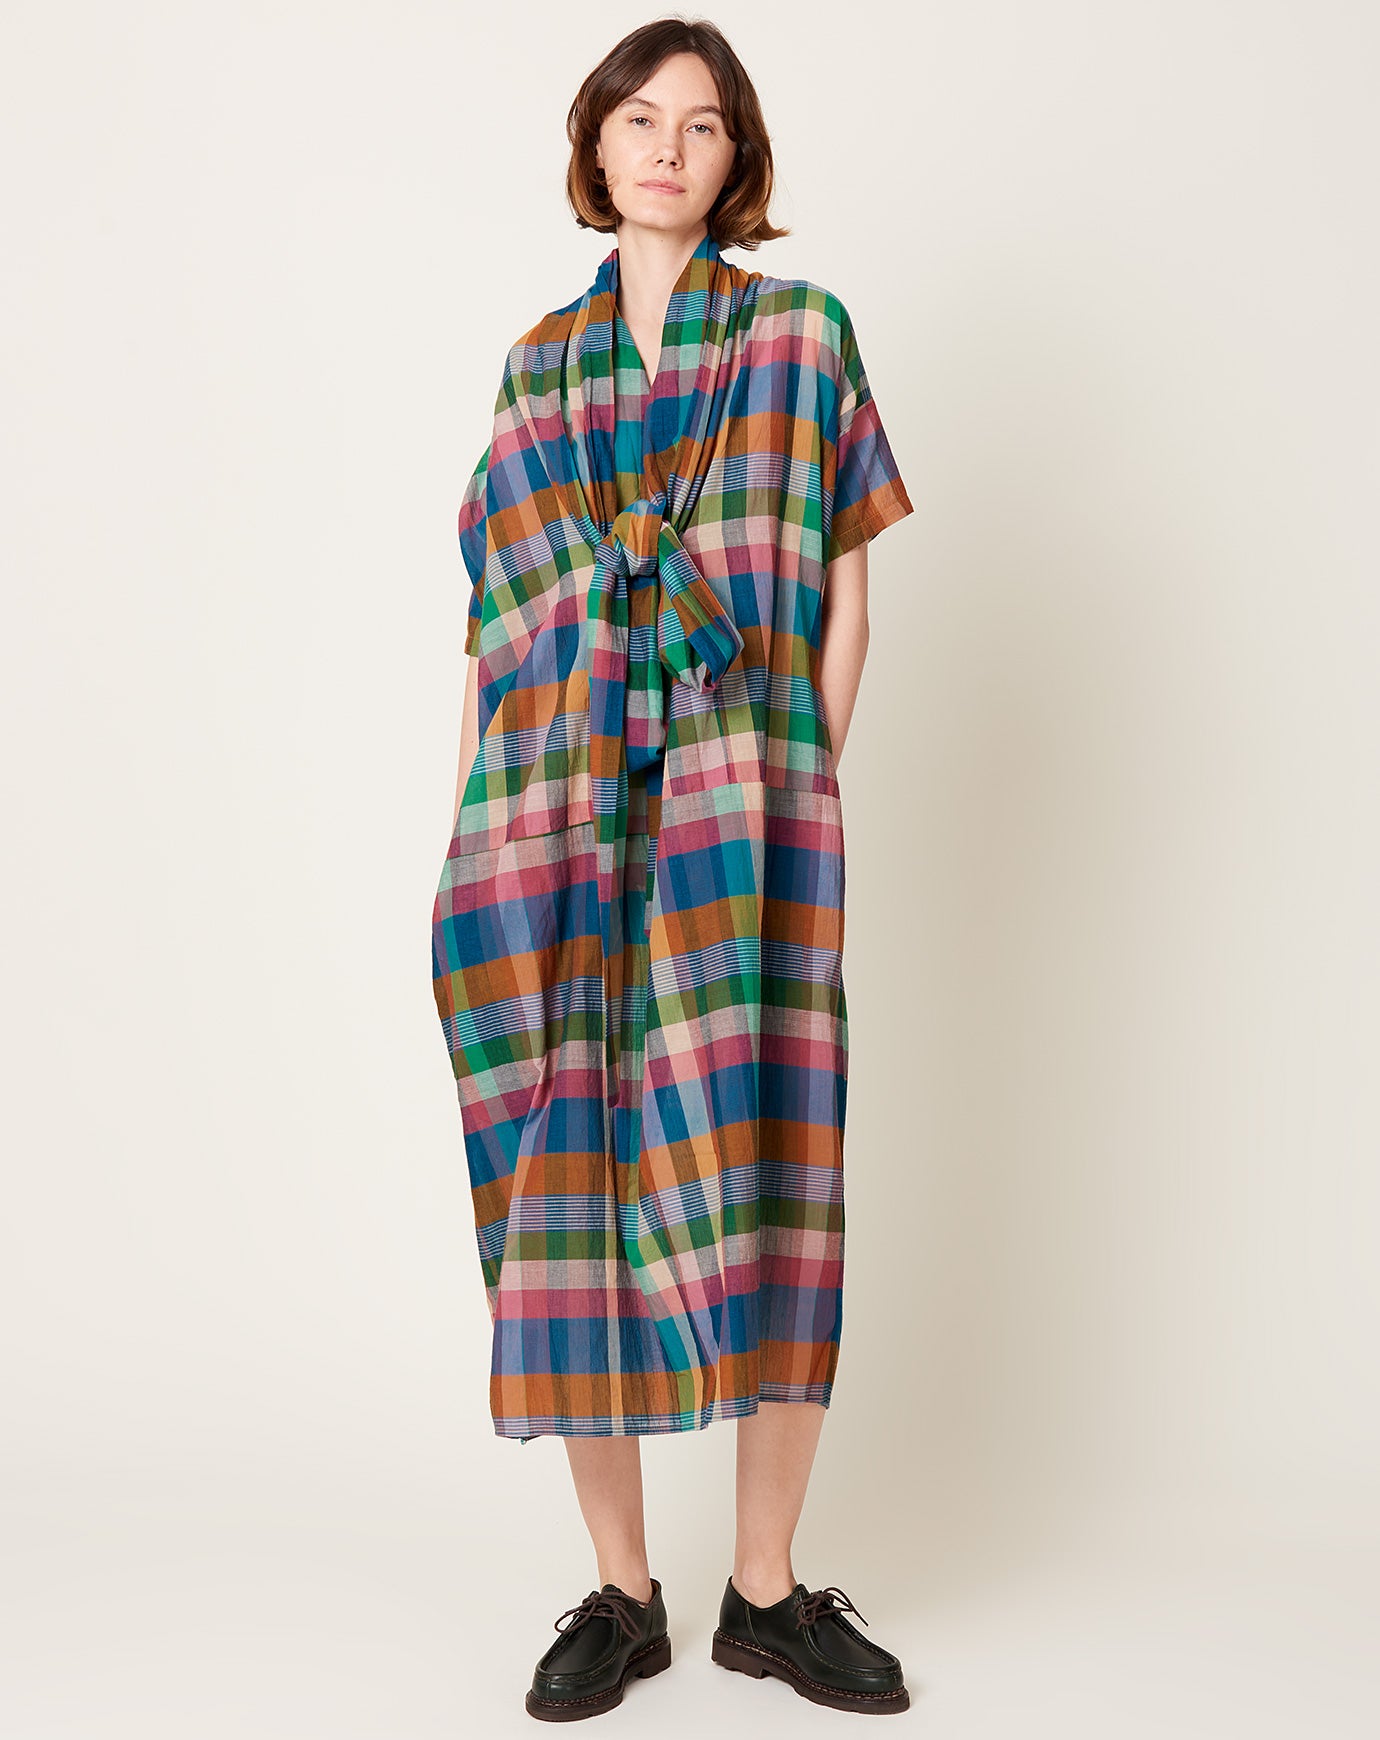 Caron Callahan Julien Dress in Bright Space Dyed Plaid